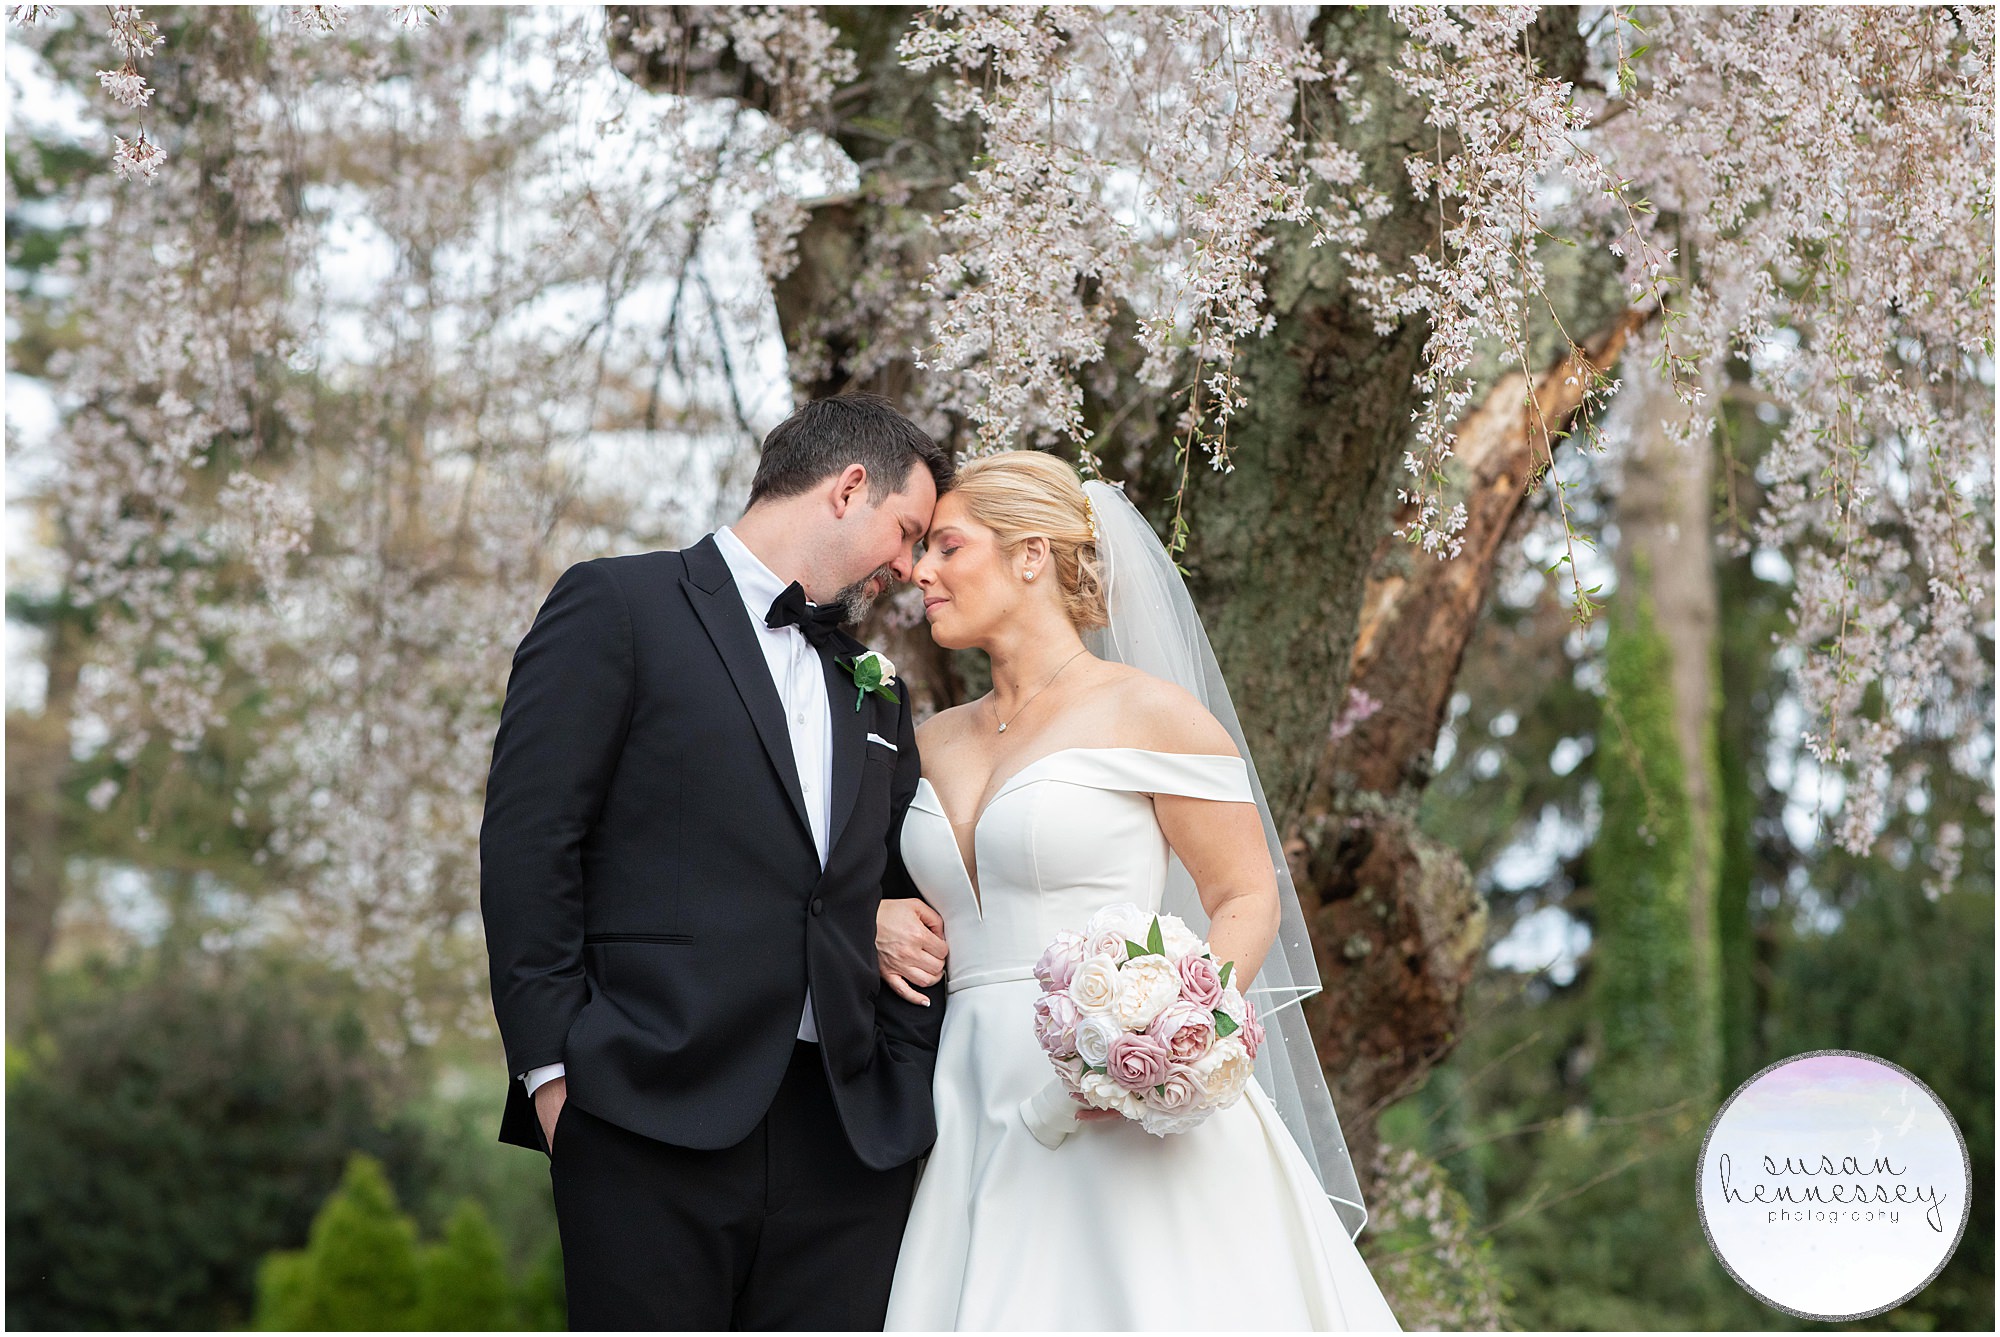 Planning a Micro Wedding? This cherry blossom spring wedding is filled with inspiration!